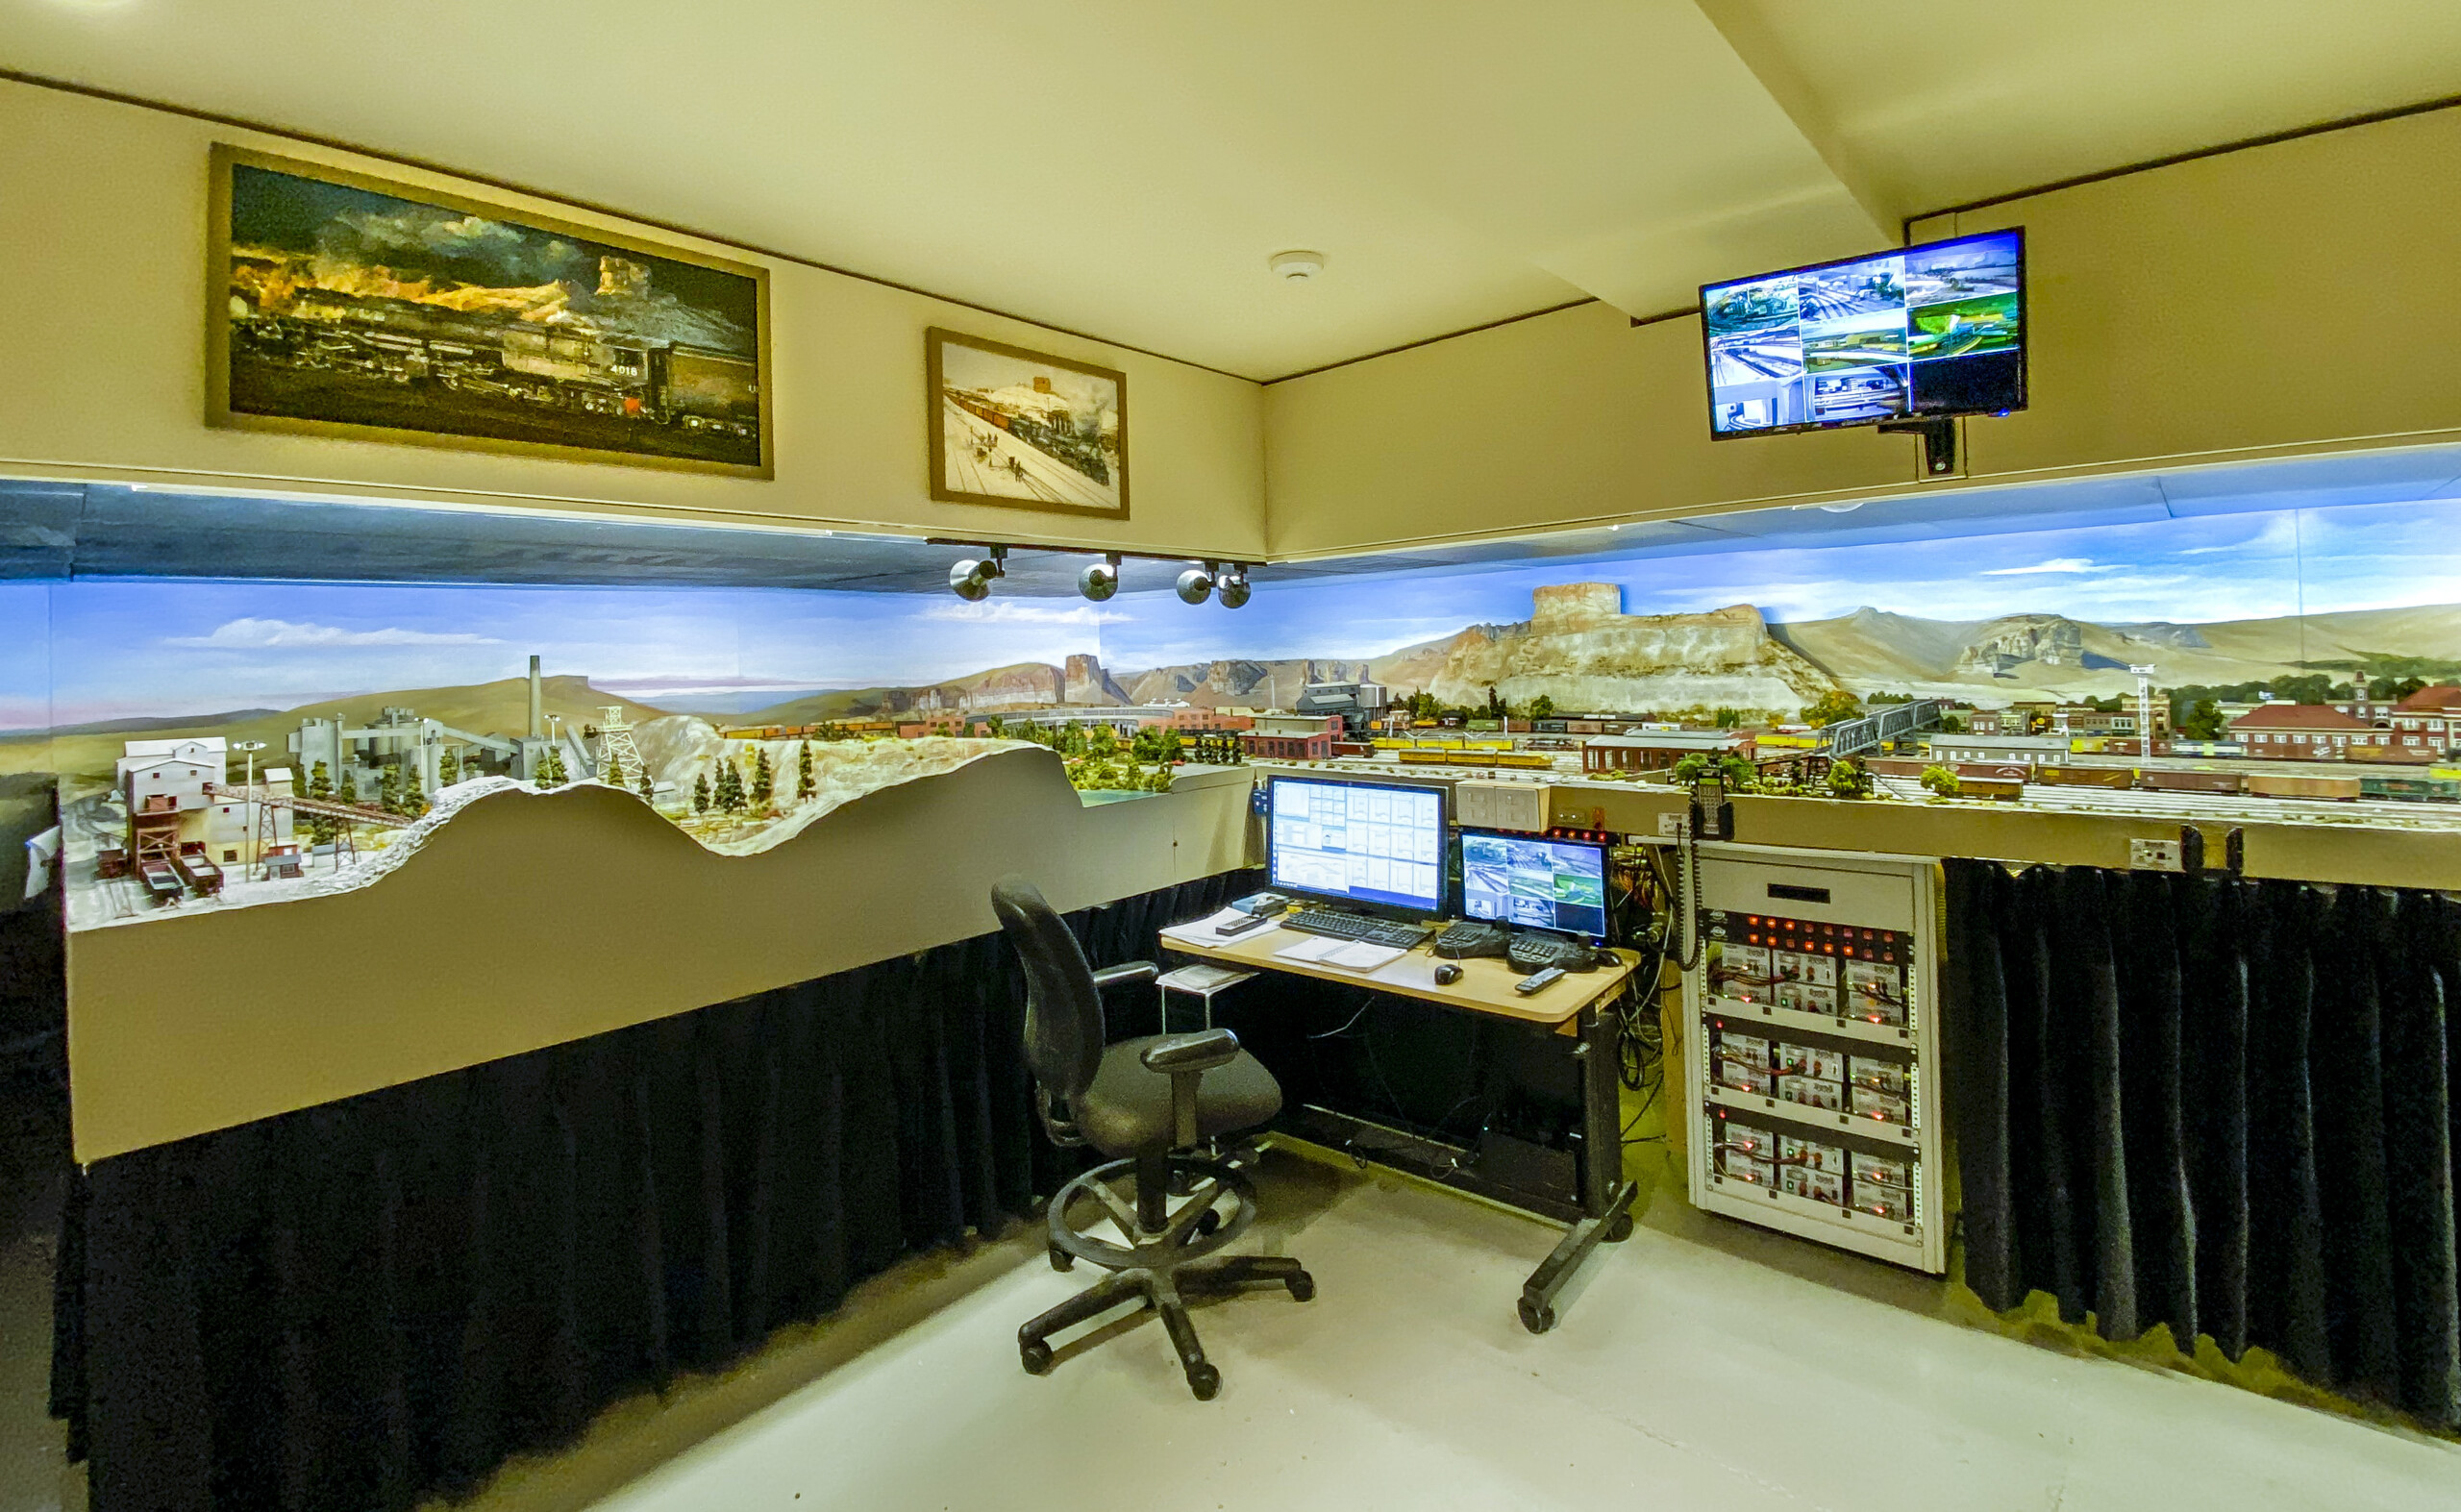 A desk with camera feeds is shown in front of the layout, with an additional monitor displaying camera feeds mounted above the layout.